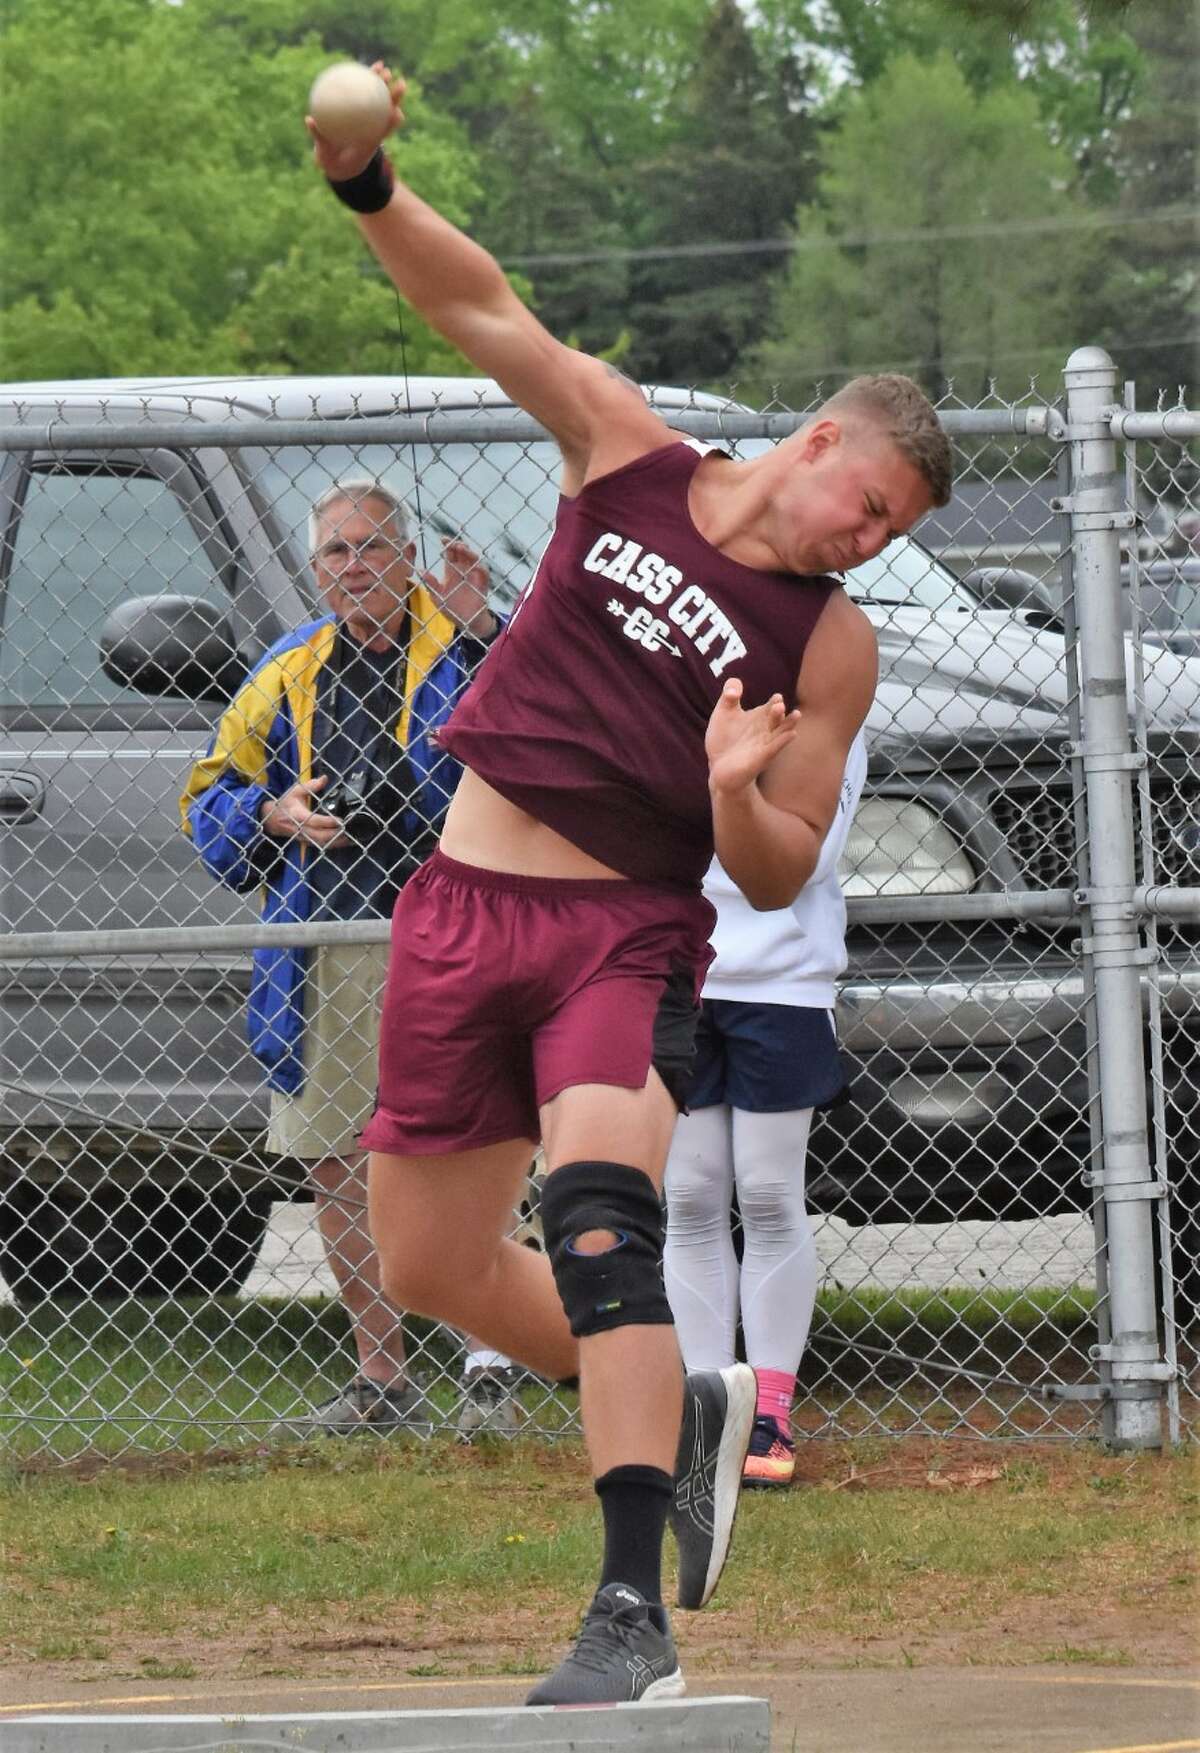 Cass City's Connor Herford qualified for states in the shot put.